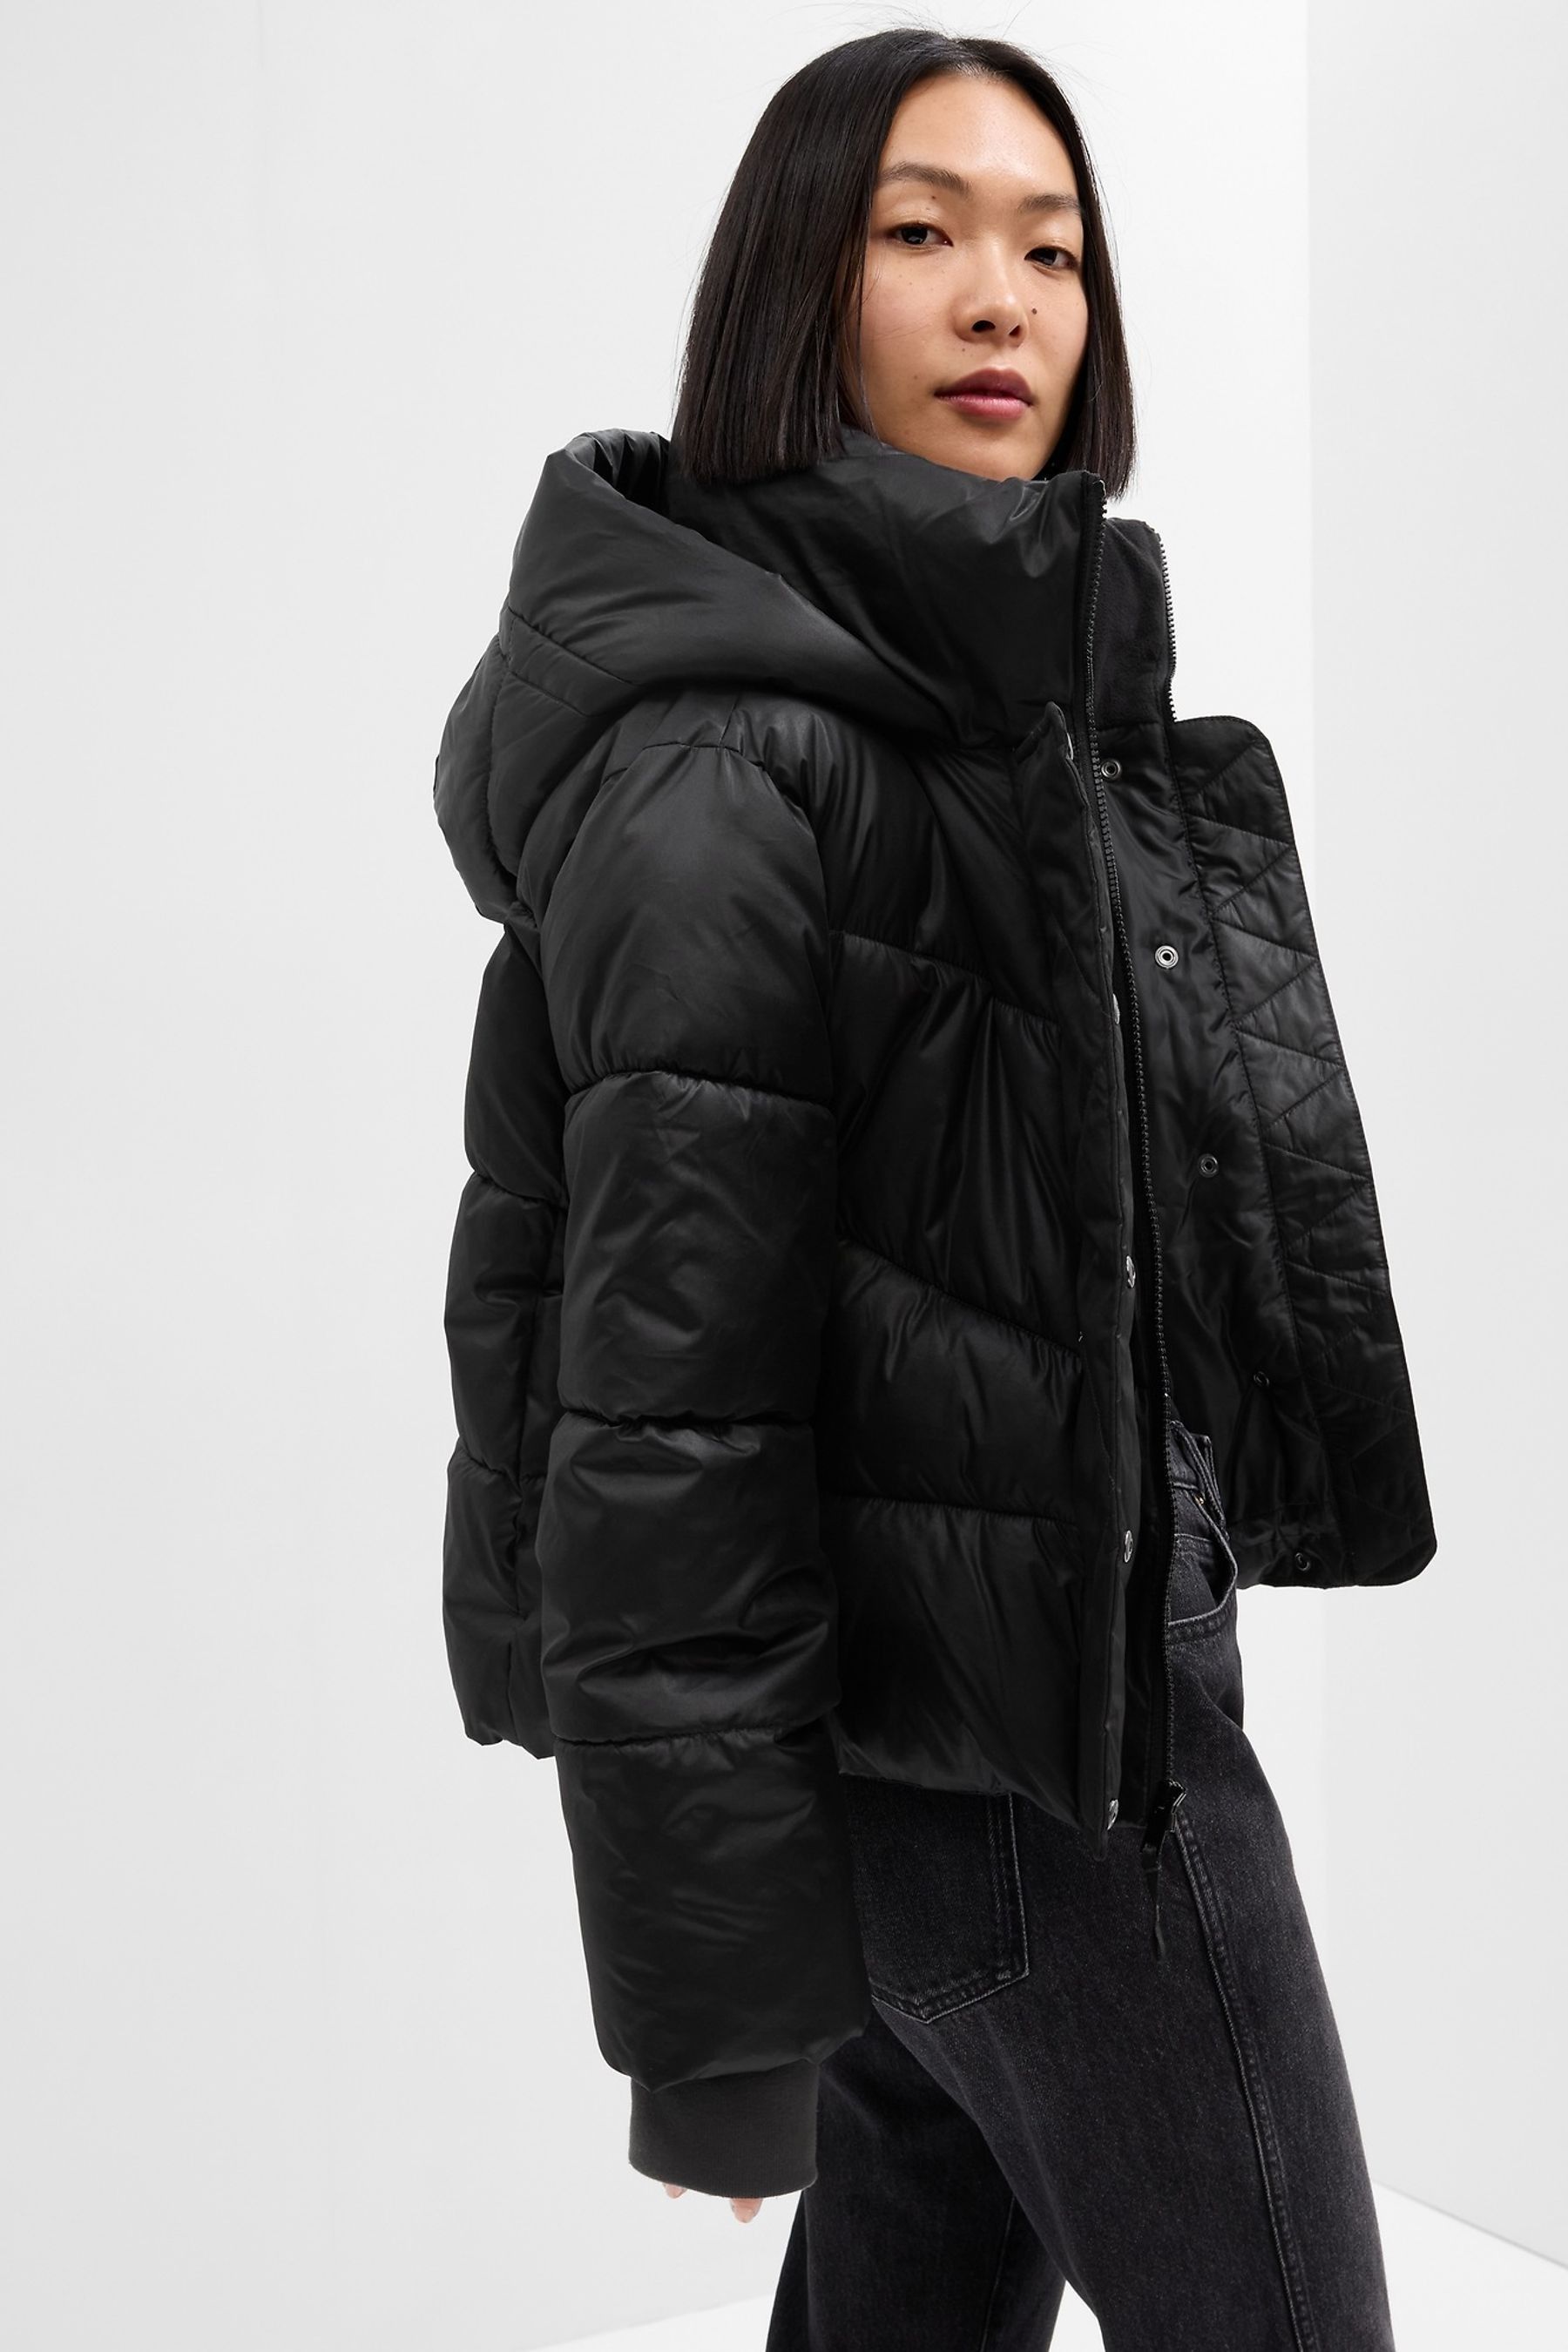 Buy Gap Cropped ColdControl Max Puffer Coat from the Gap online shop